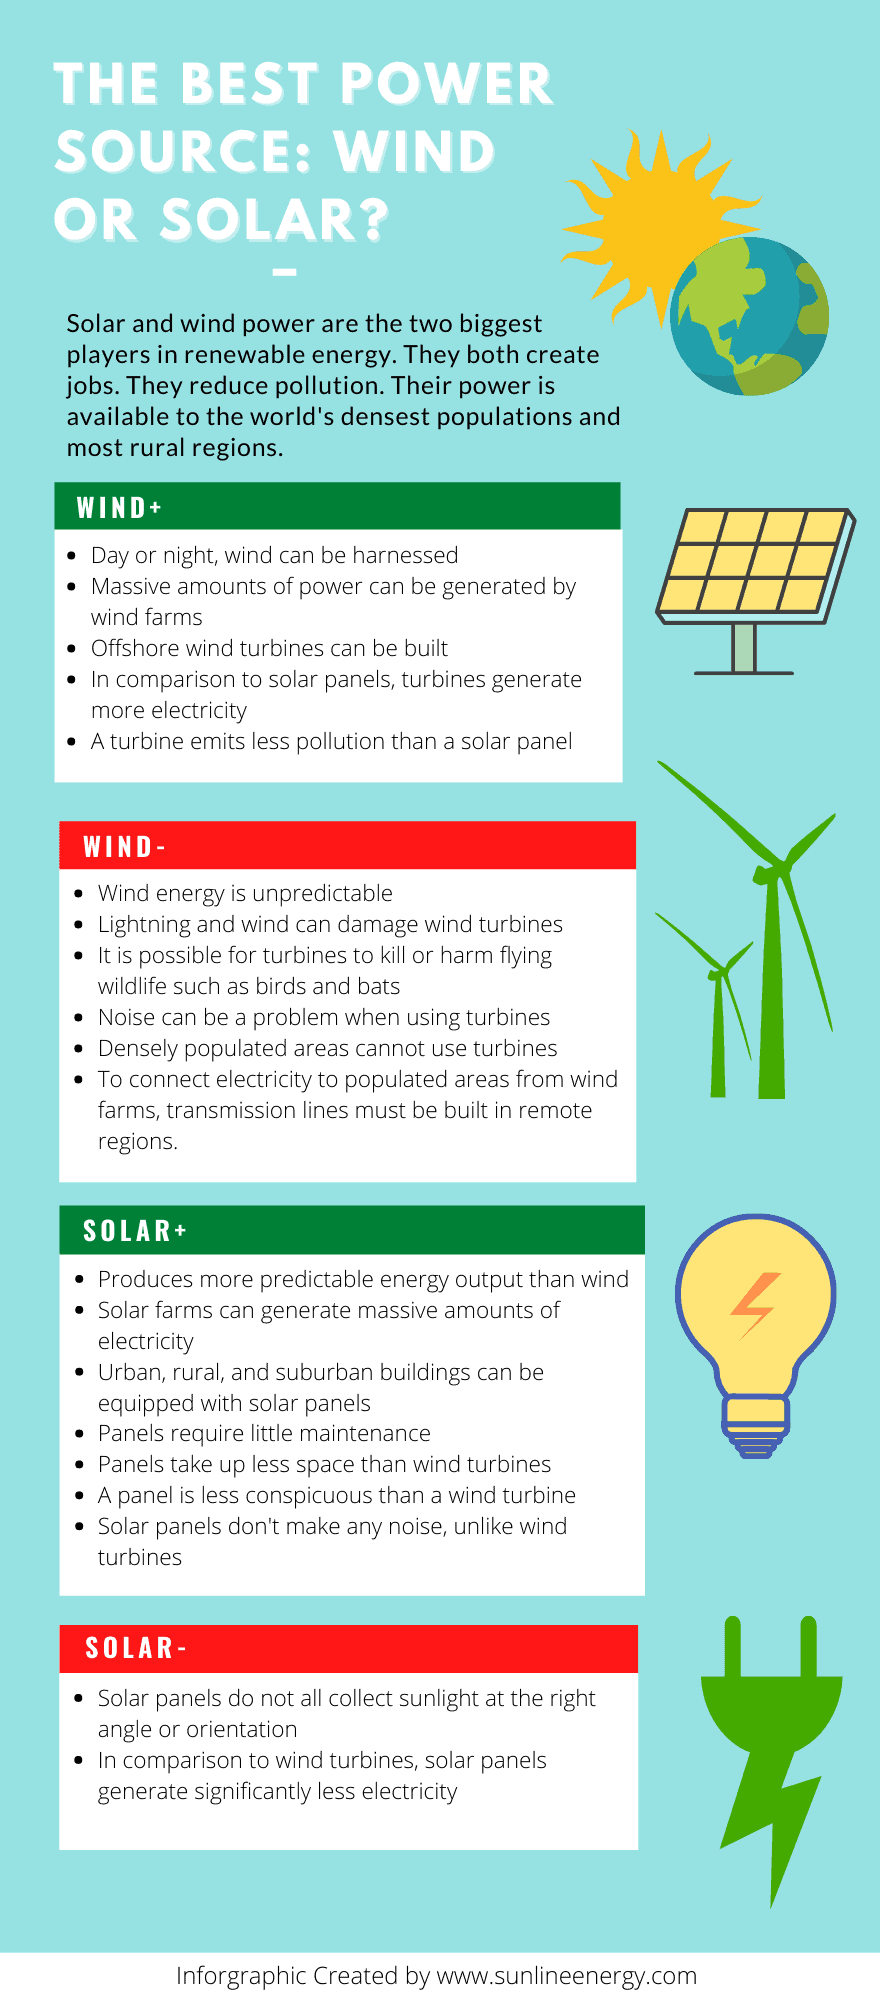 The Best Power Source: Wind or Solar?